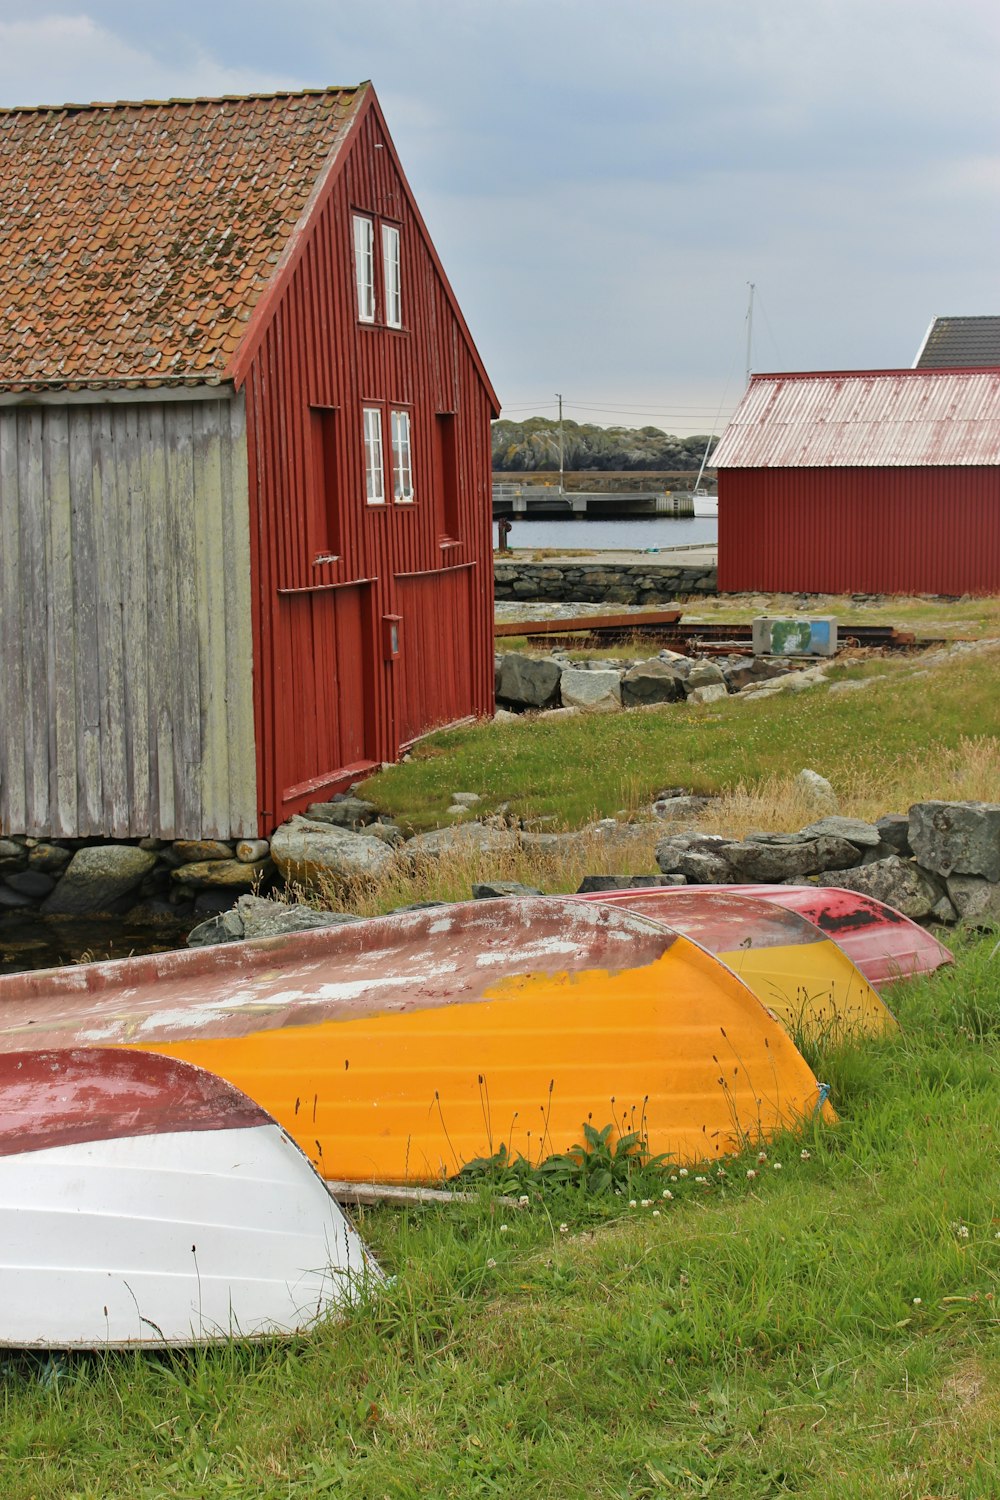 boats and buildings on grass field during day